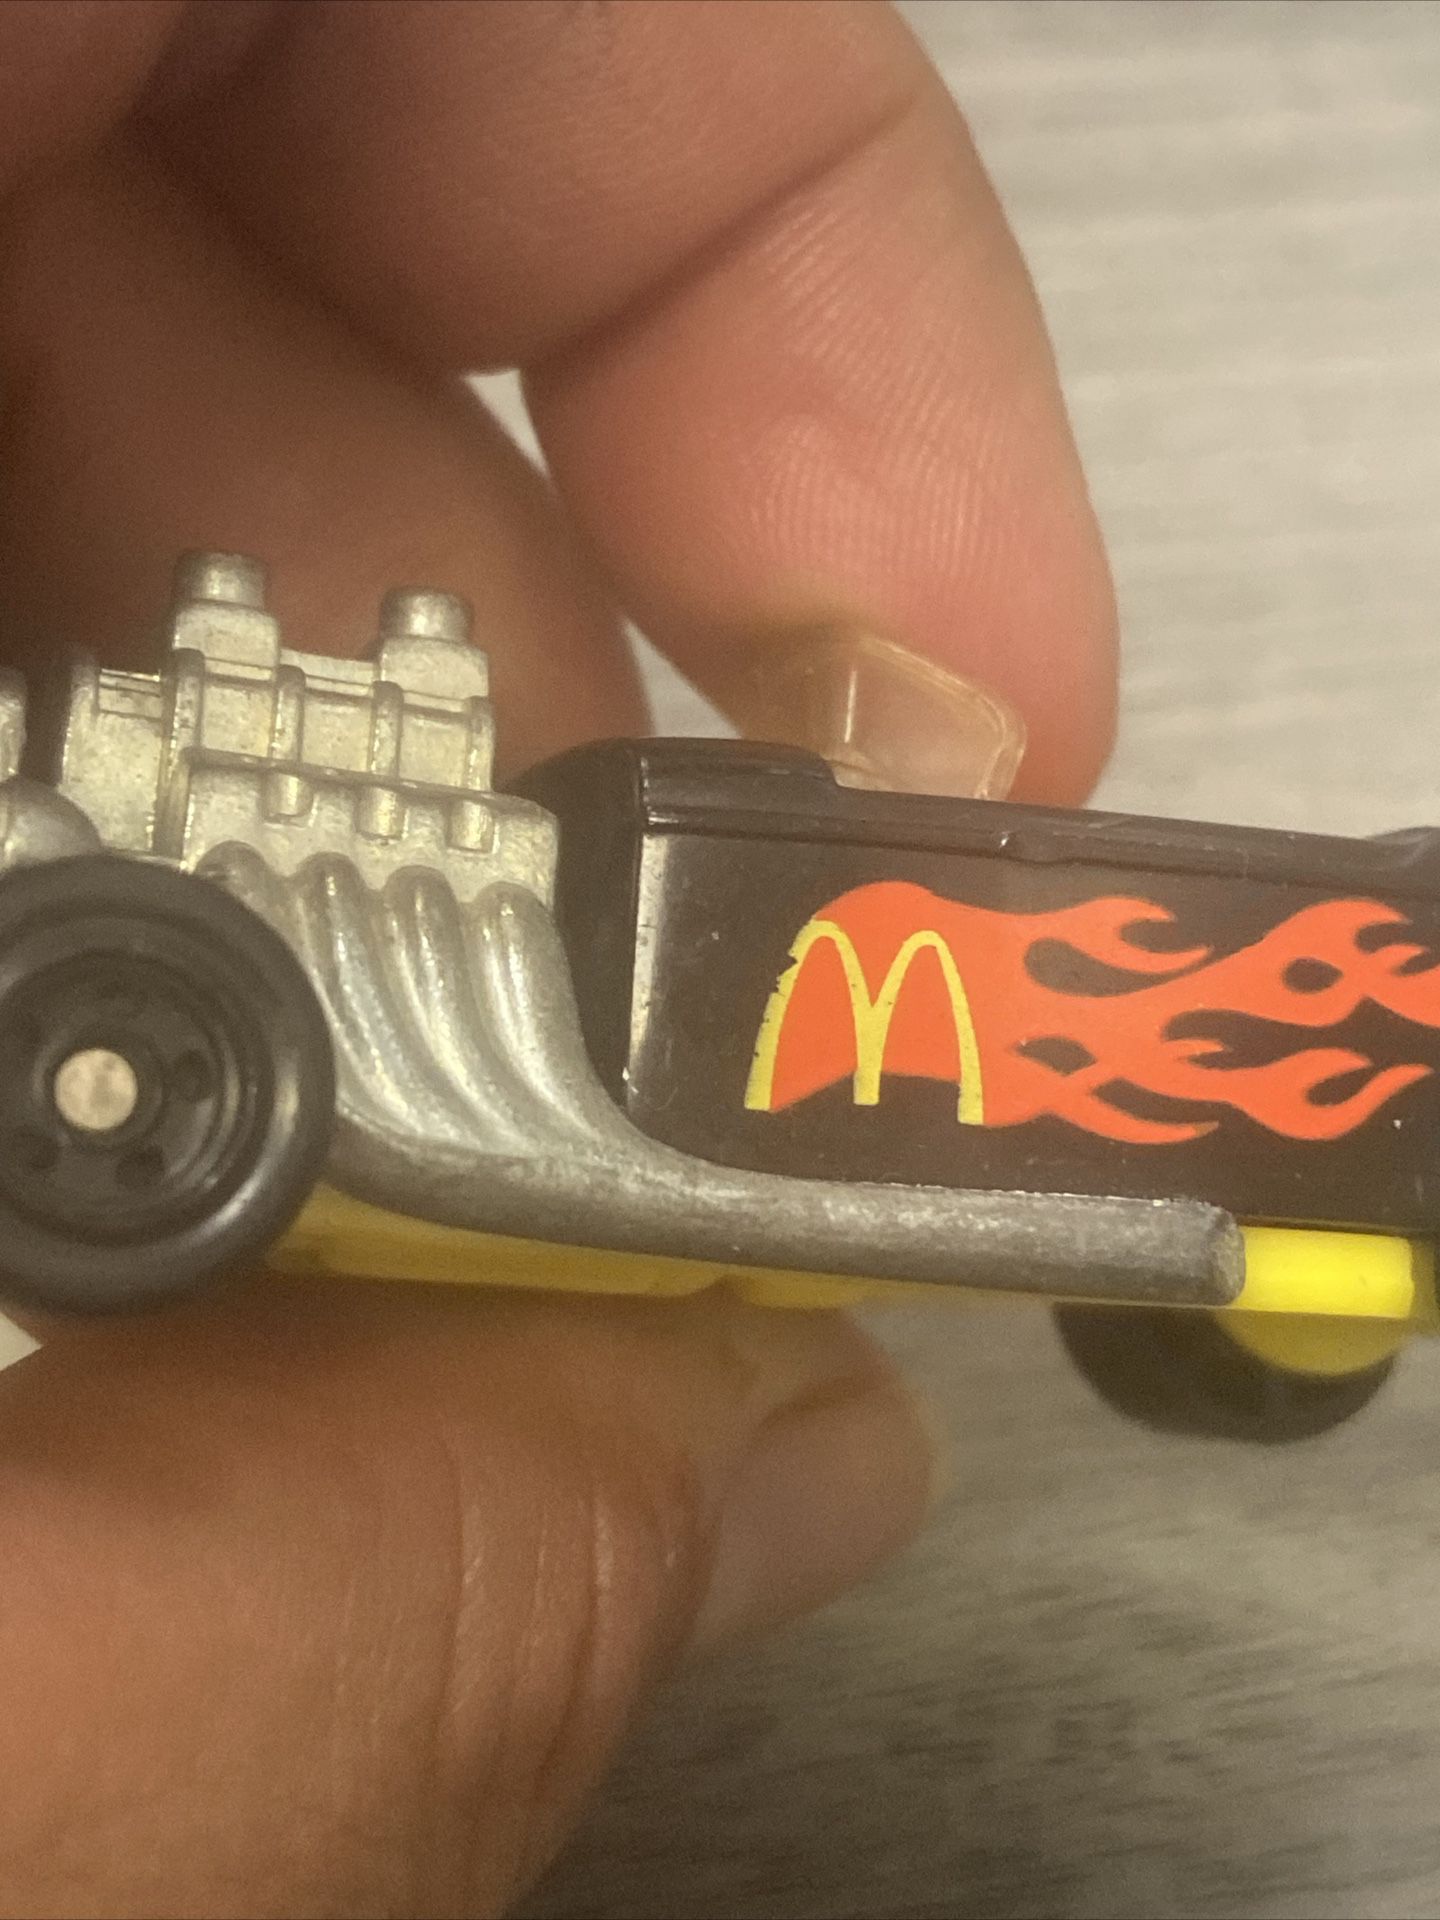 This rare Hot Wheels McDonald's Limited Special Retro Toy Collectable from 1993 is a must-have for any diecast and toy vehicle collector. The black Ho